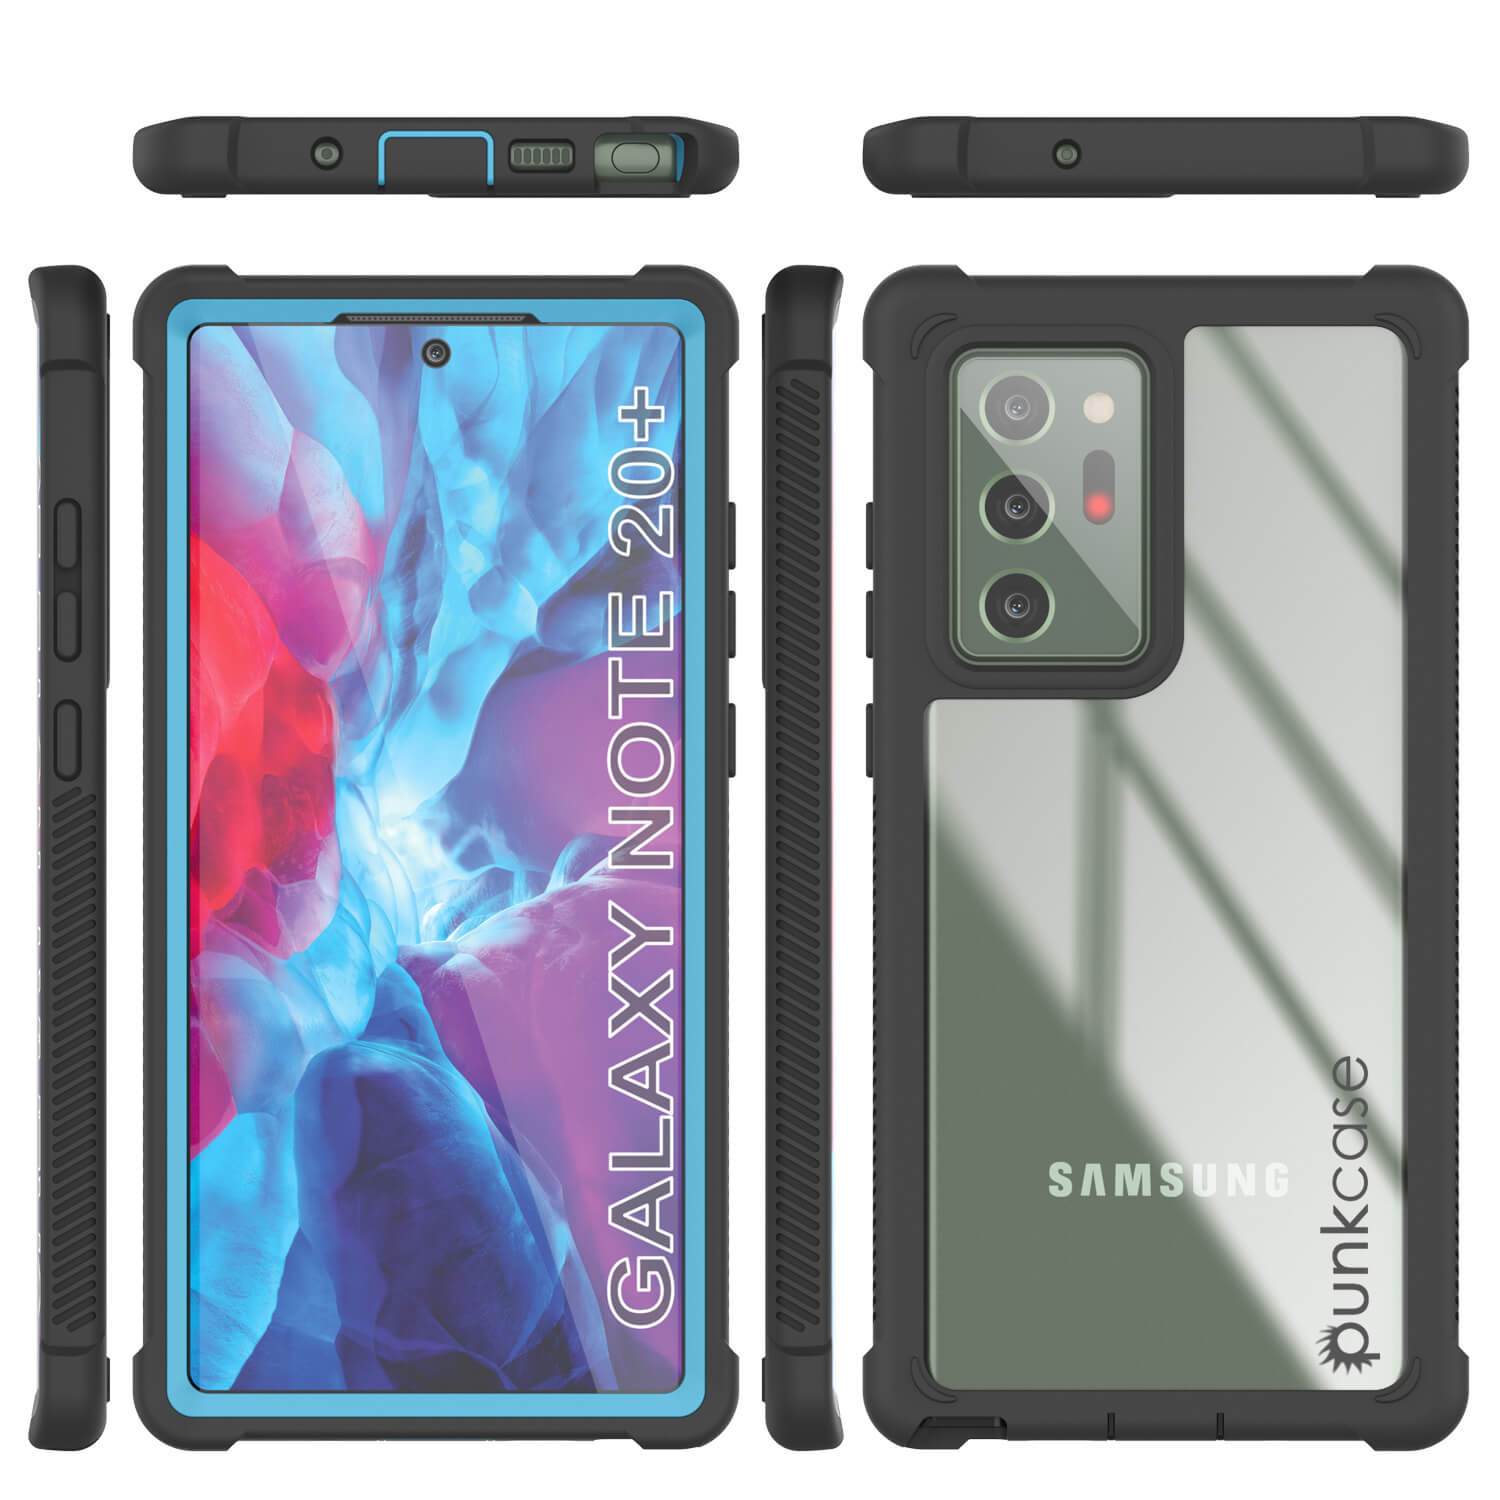 Punkcase Galaxy Note 20 Ultra Case, [Spartan Series] Light Blue Rugged Heavy Duty Cover W/Built in Screen Protector